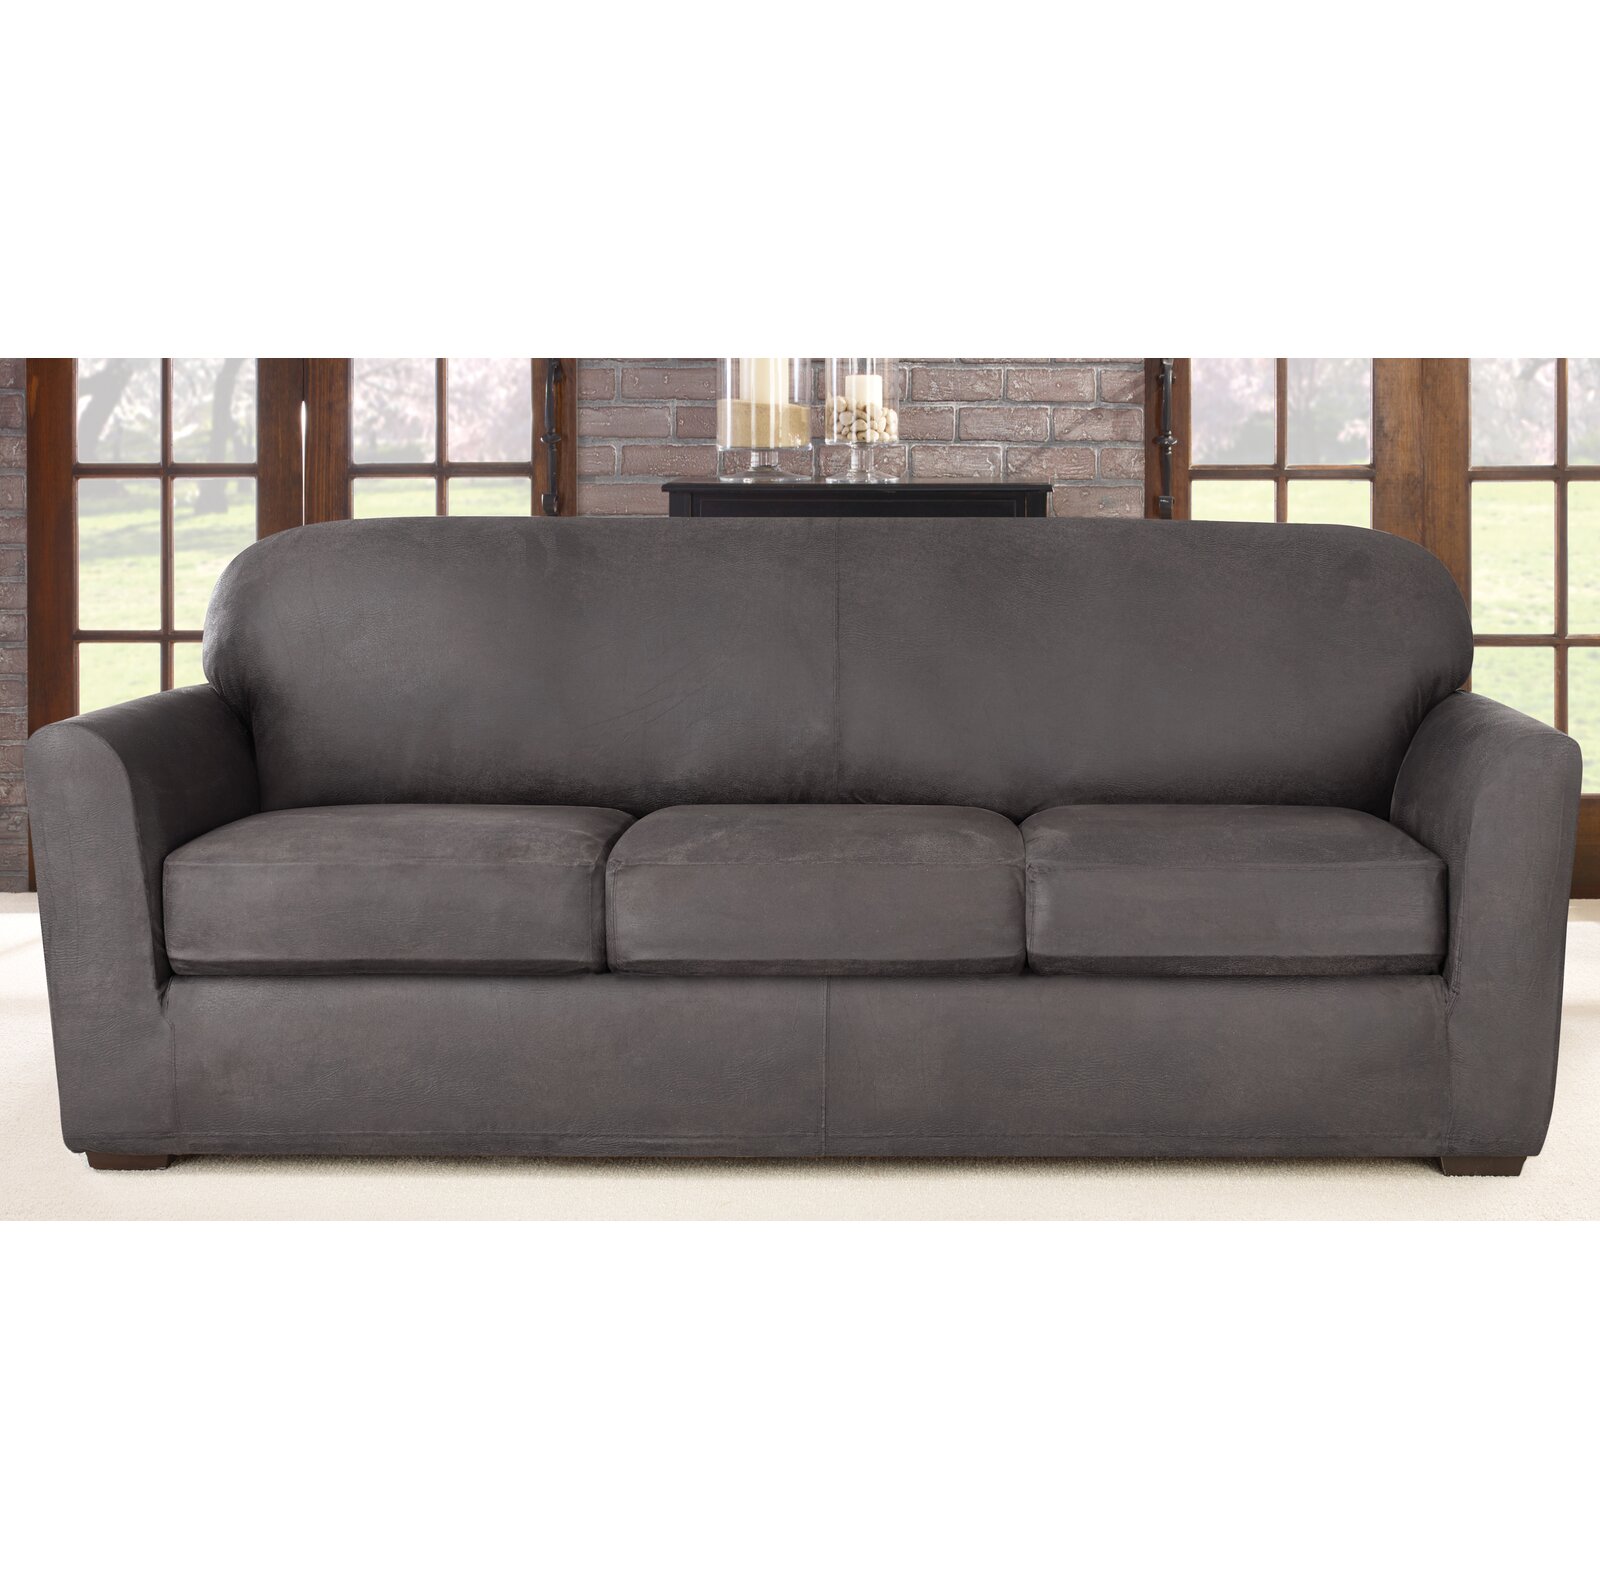 Ultimate Stretch Box Cushion Sofa Slipcover, Upholstery Material: Polyester Blend, Upholstery Material Details: Faux suede - image 2 of 6